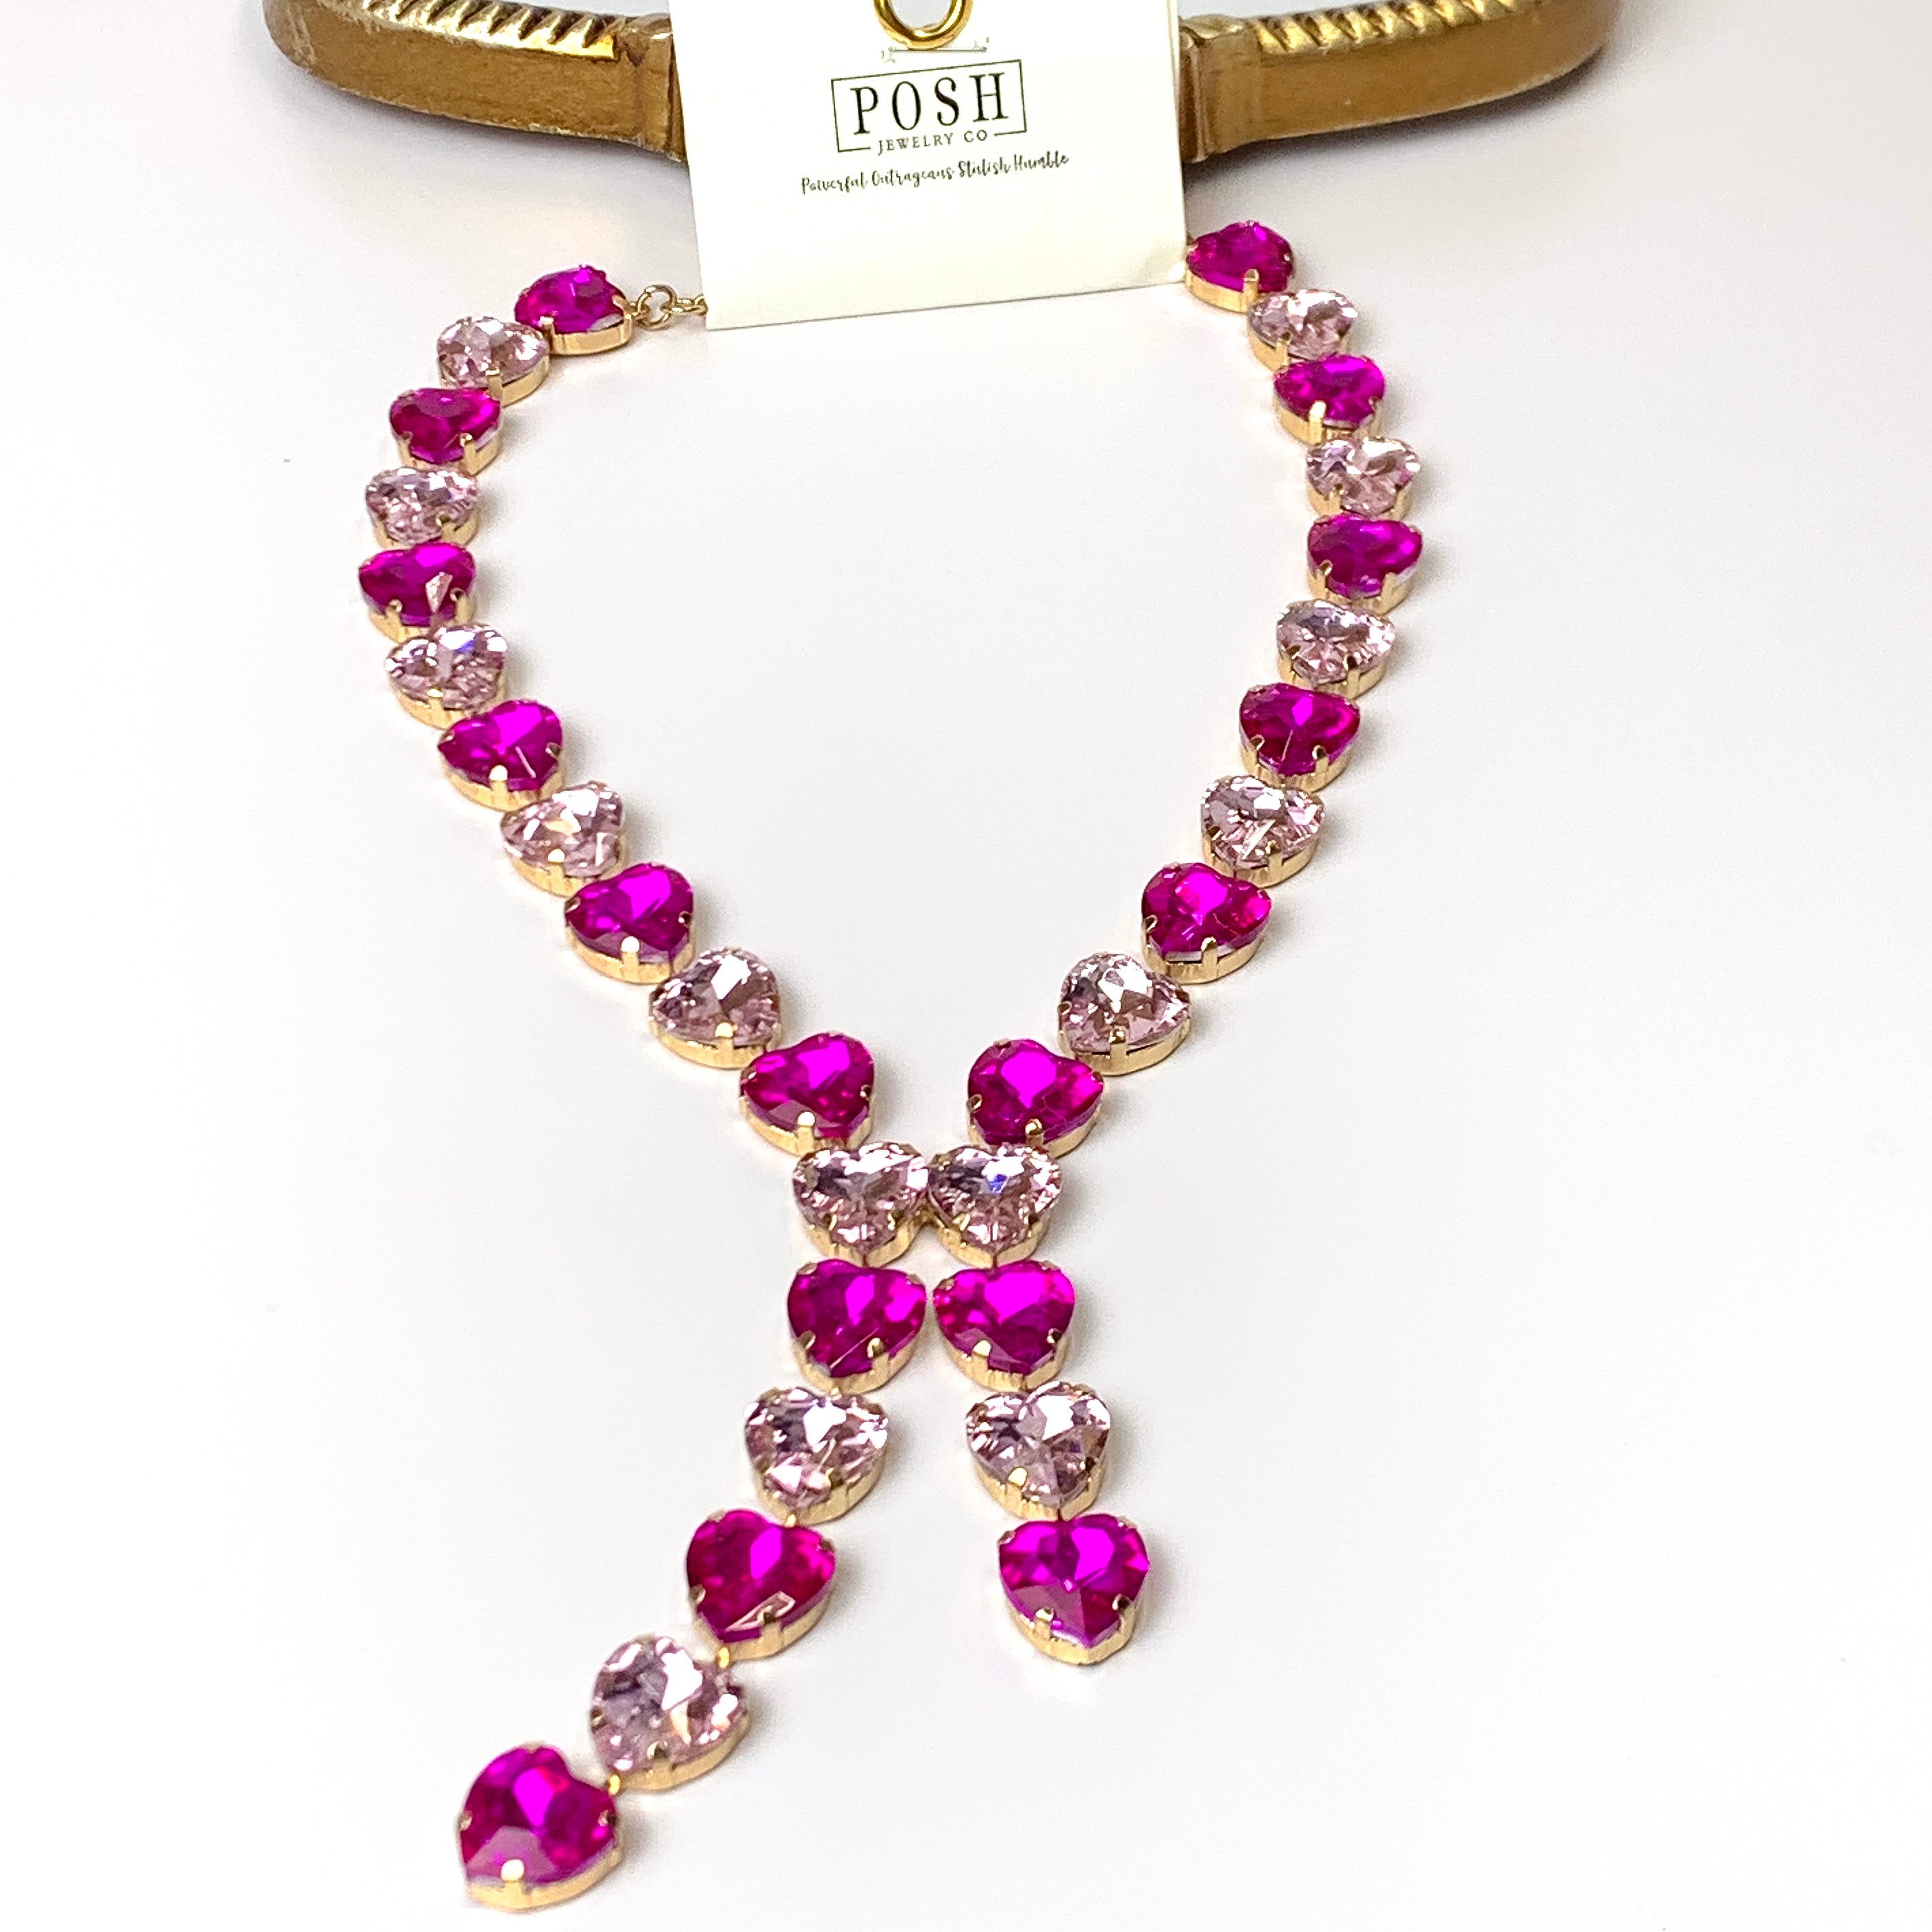 Posh by Pink Panache | Gold Tone Heart Shaped Crystal Lariat Necklace in Fuchsia Pink Mix - Giddy Up Glamour Boutique